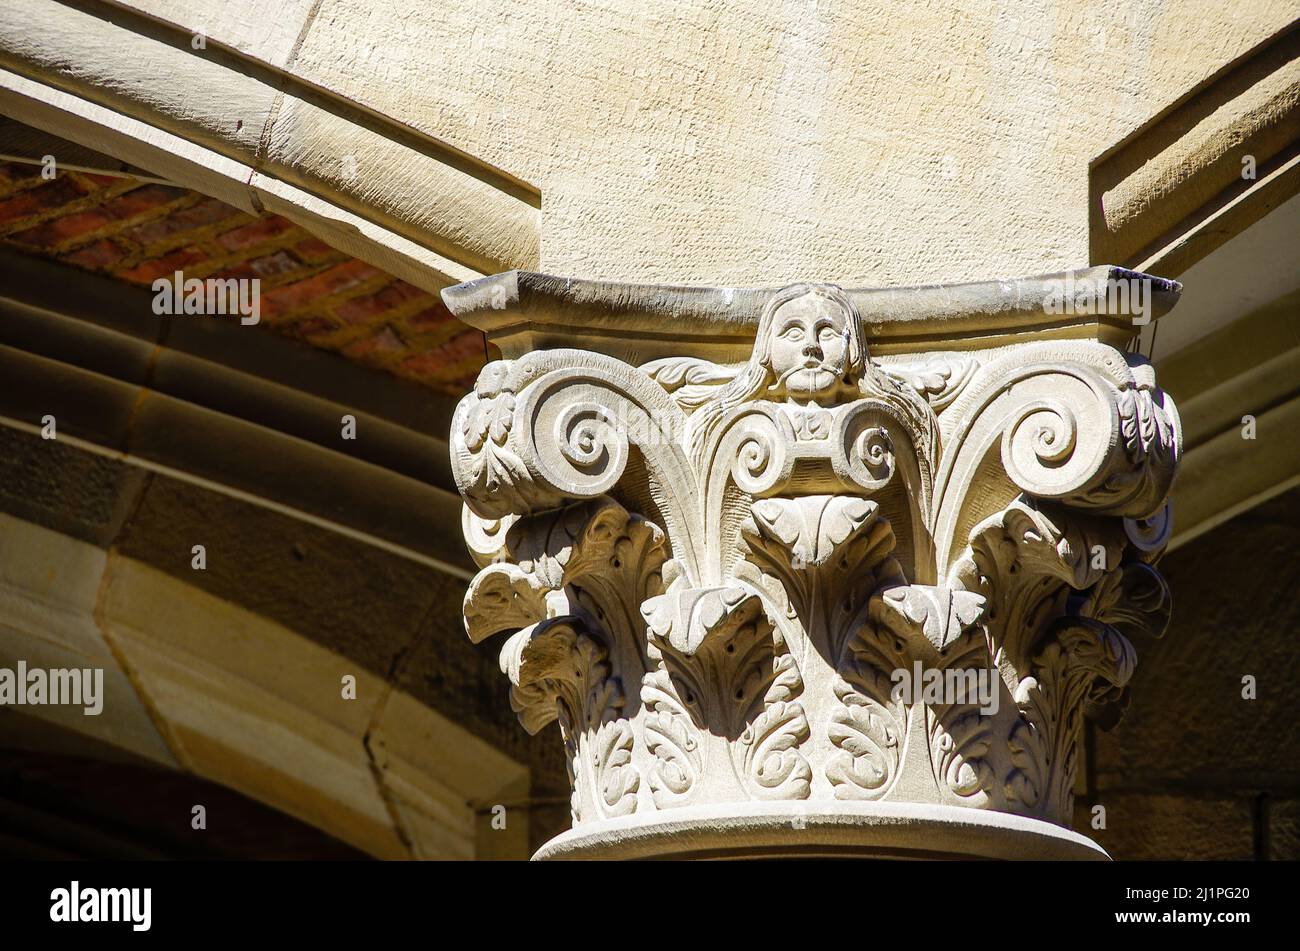 Stuttgart, Baden-Württemberg, Germany: Richly decorated column capital in the arcaded courtyard of the Old Palace (Altes Schloss). Stock Photo